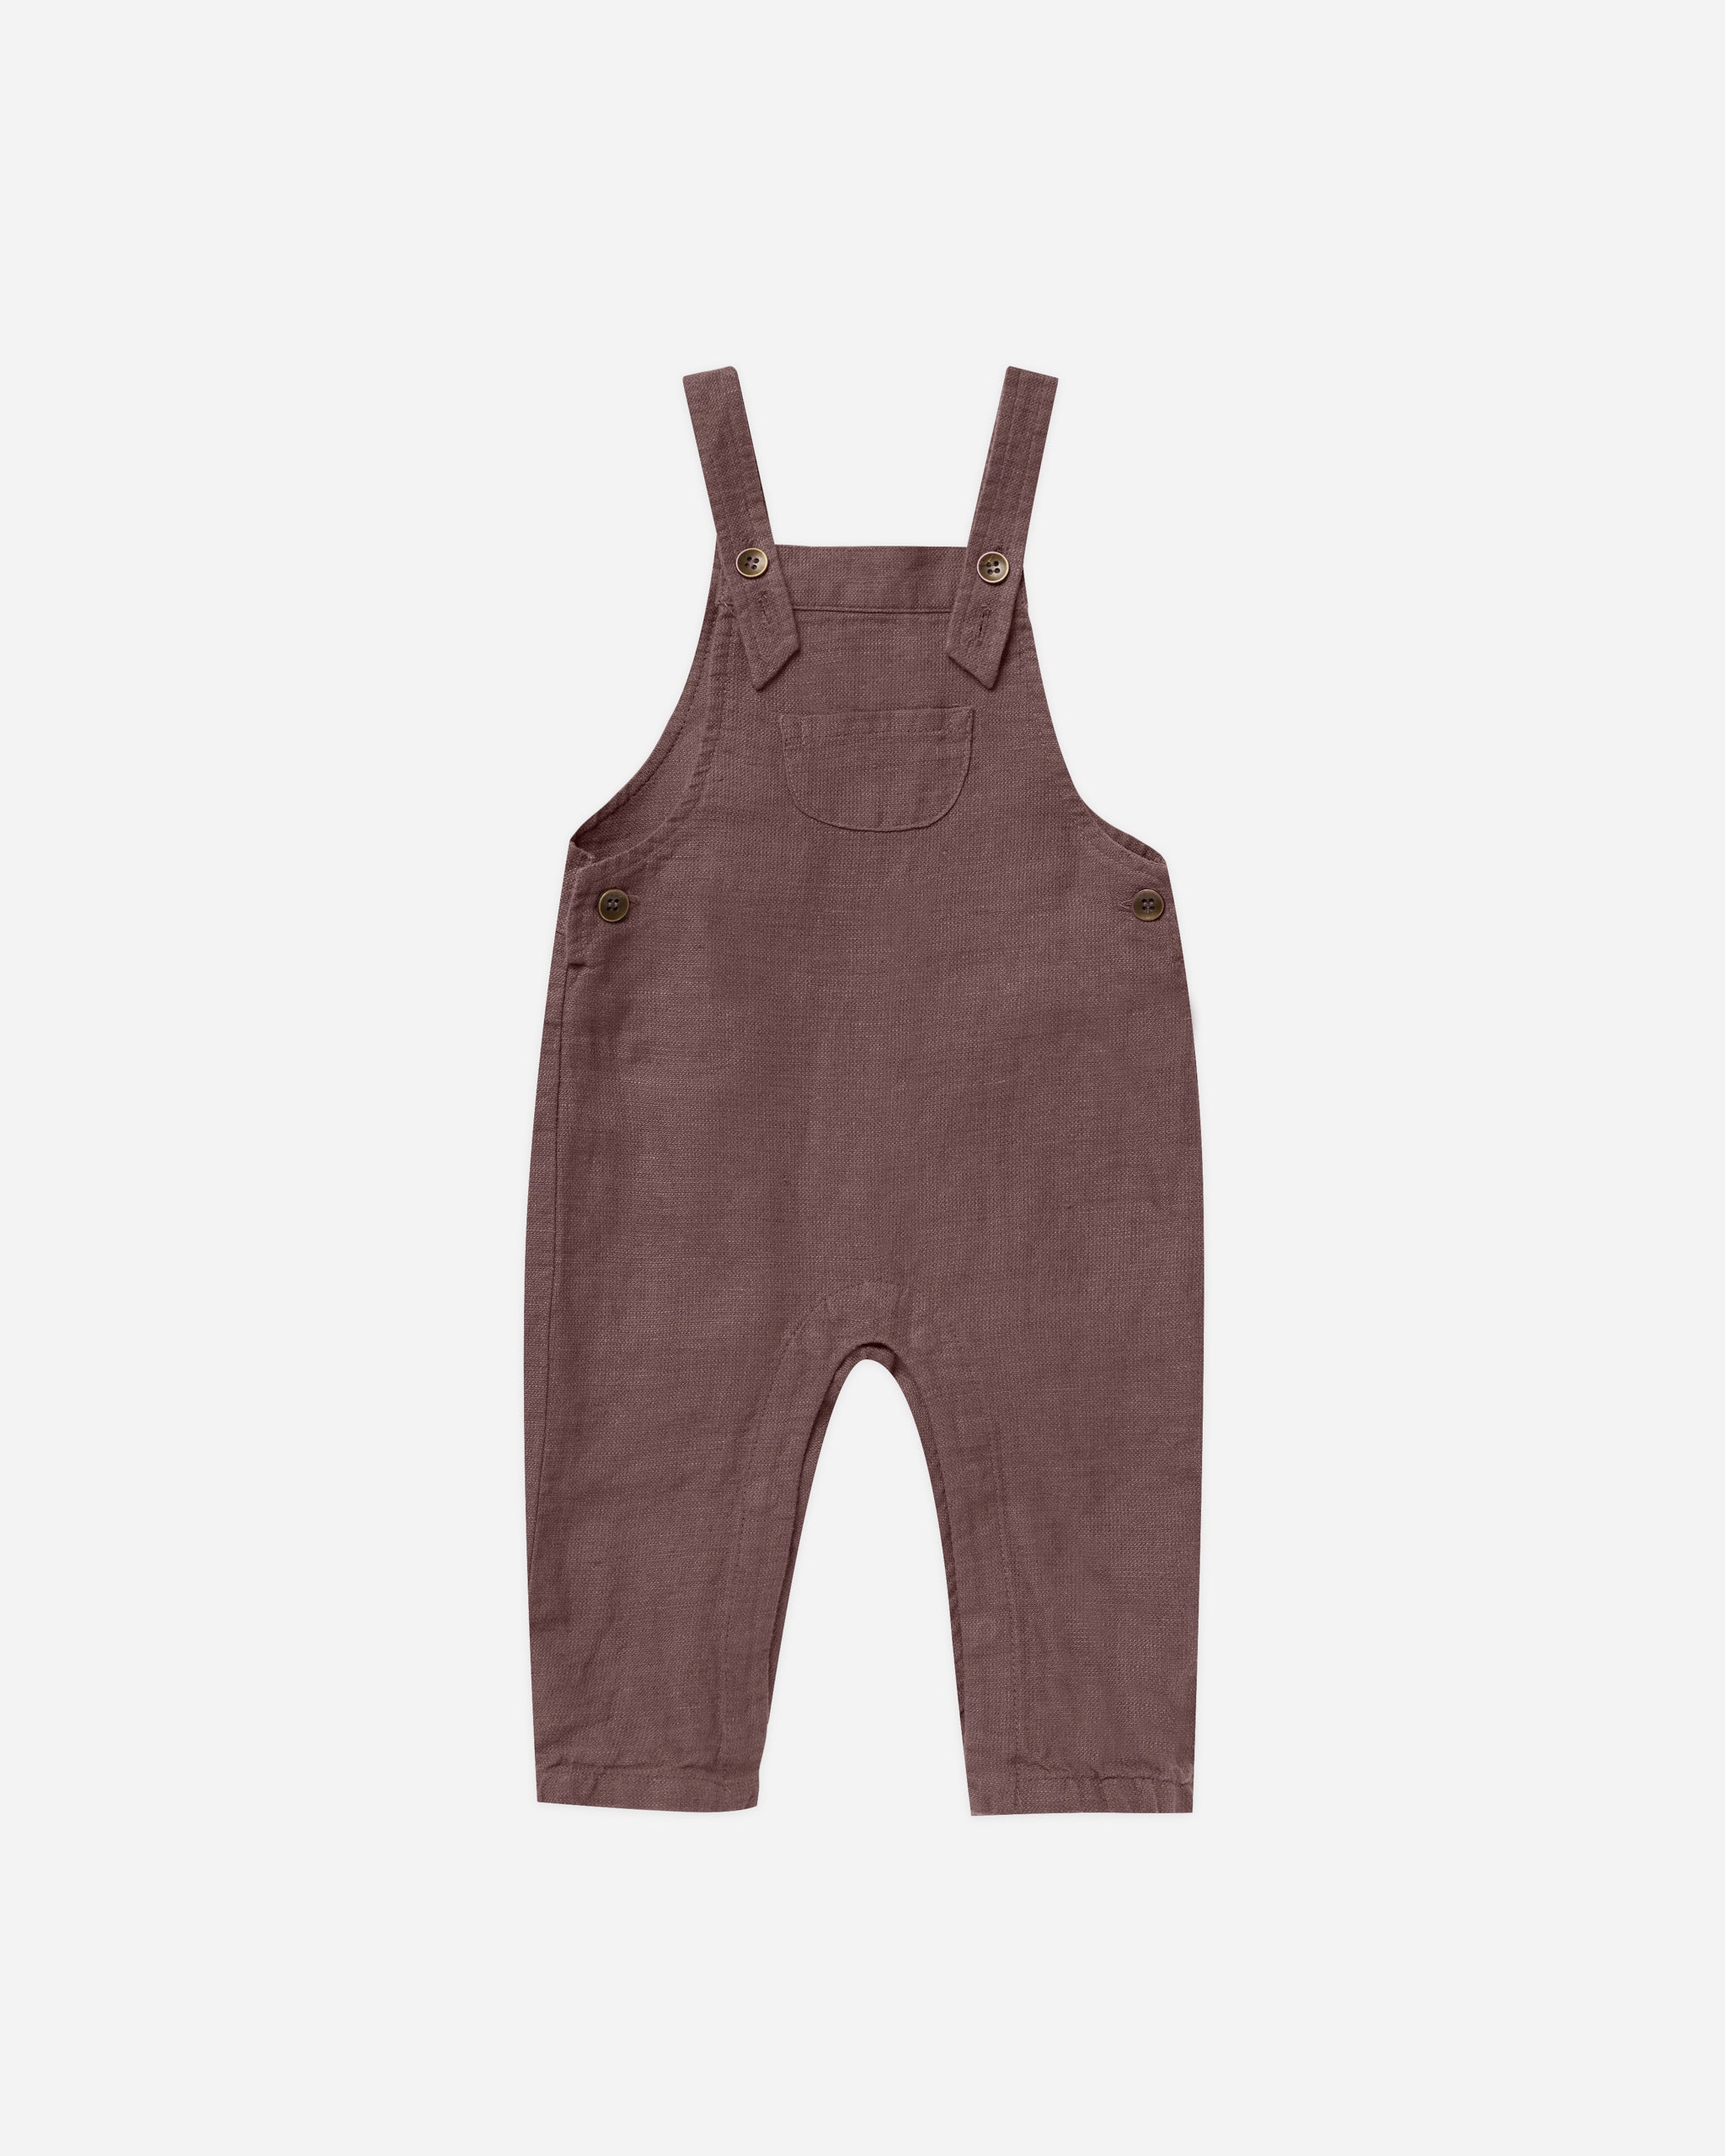 Baby Overalls || Plum - Rylee + Cru | Kids Clothes | Trendy Baby Clothes | Modern Infant Outfits |